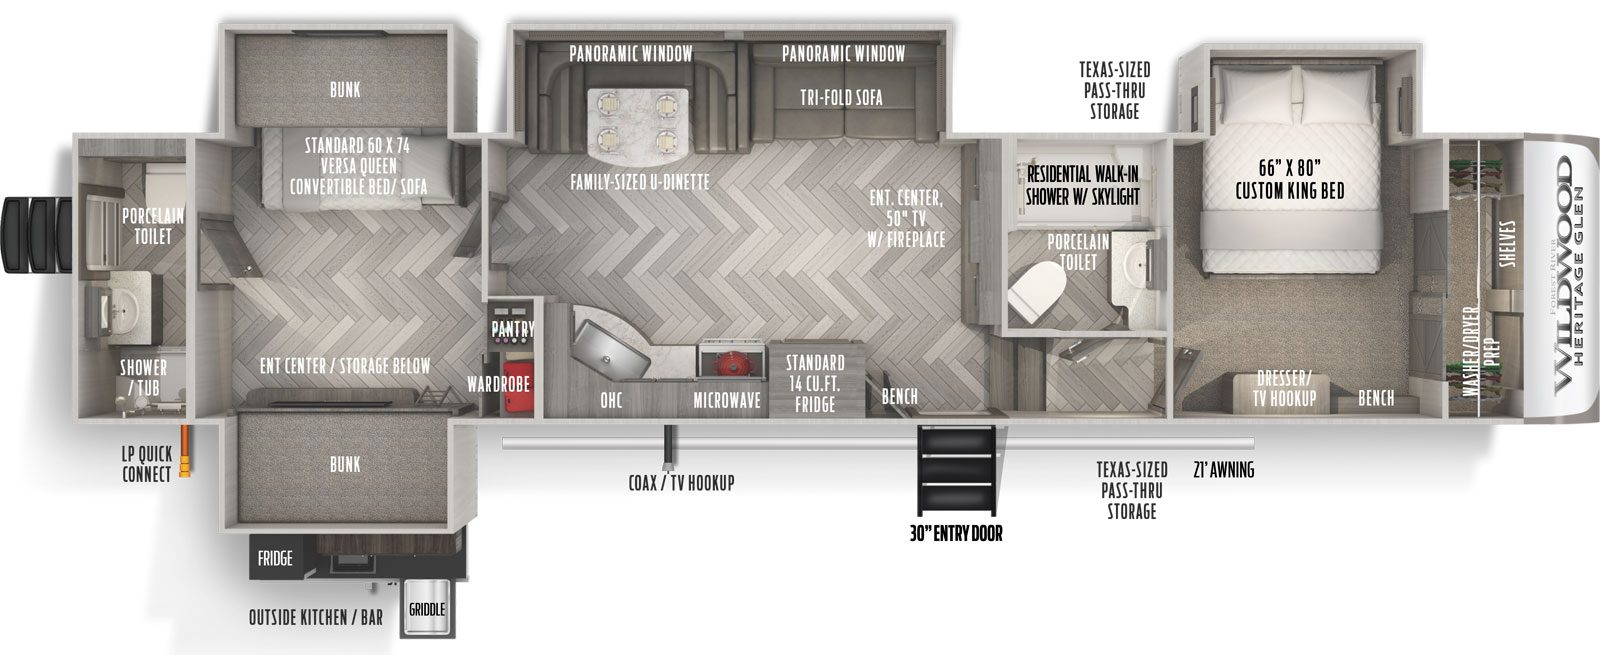 Heritage Glen 356QB floorplan. The 356QB has 4 slide outs and one entry door.